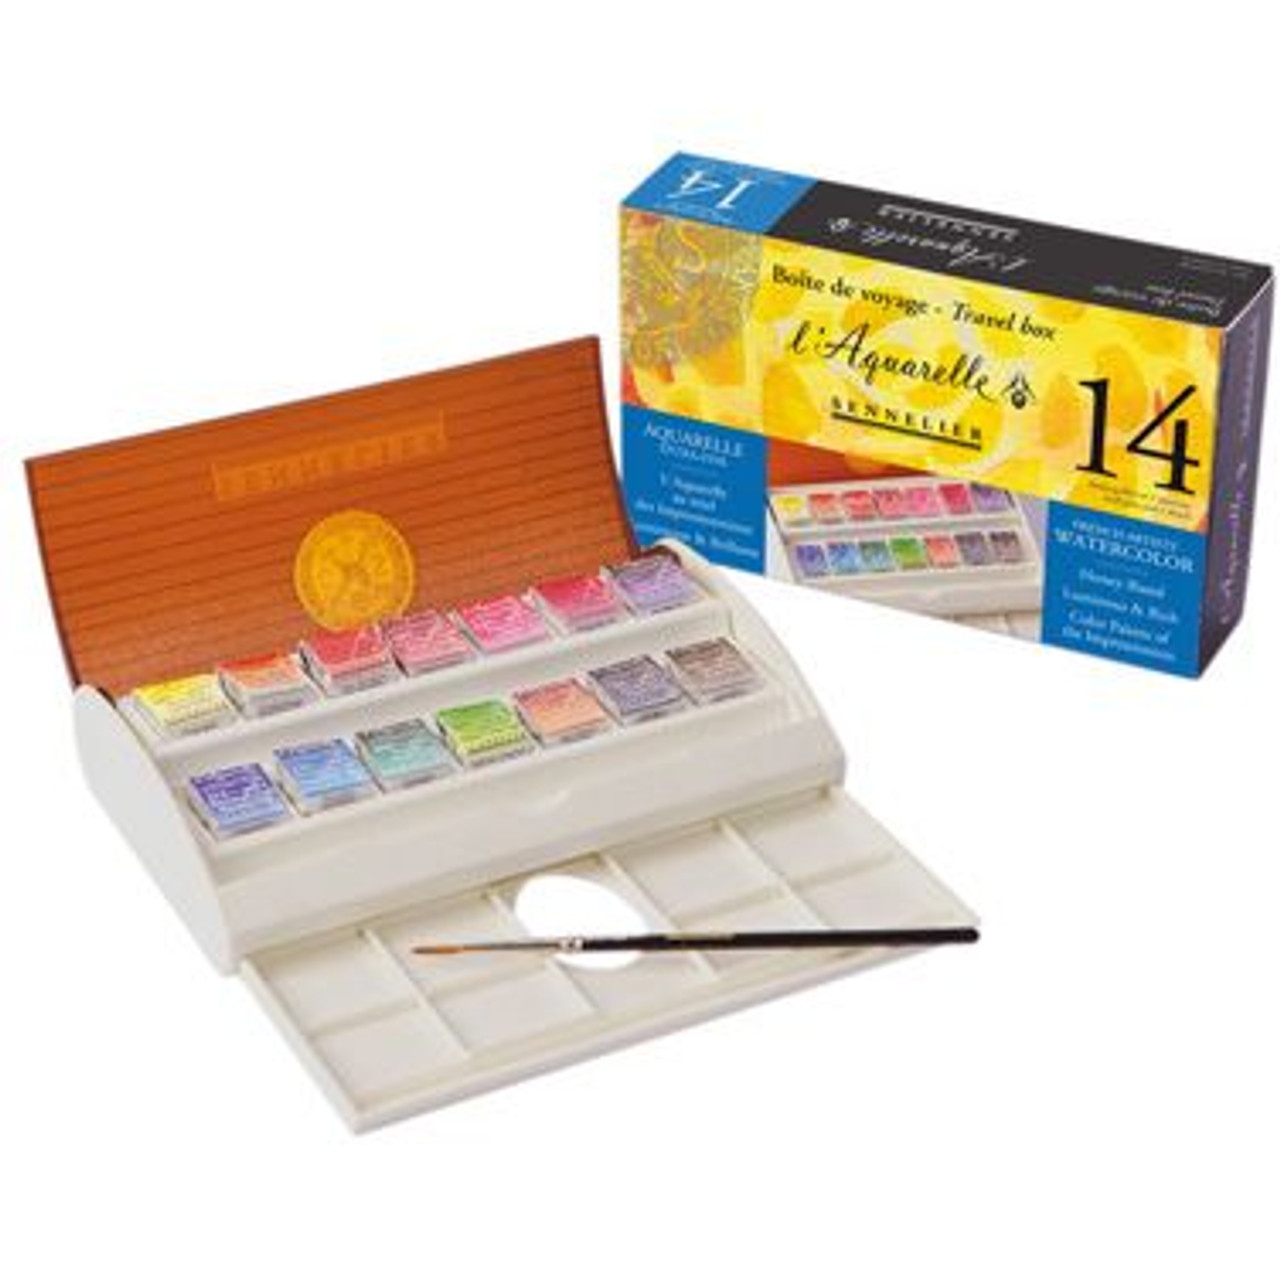 Sennelier French Artists' Watercolor Plastic Travel Set - FLAX art